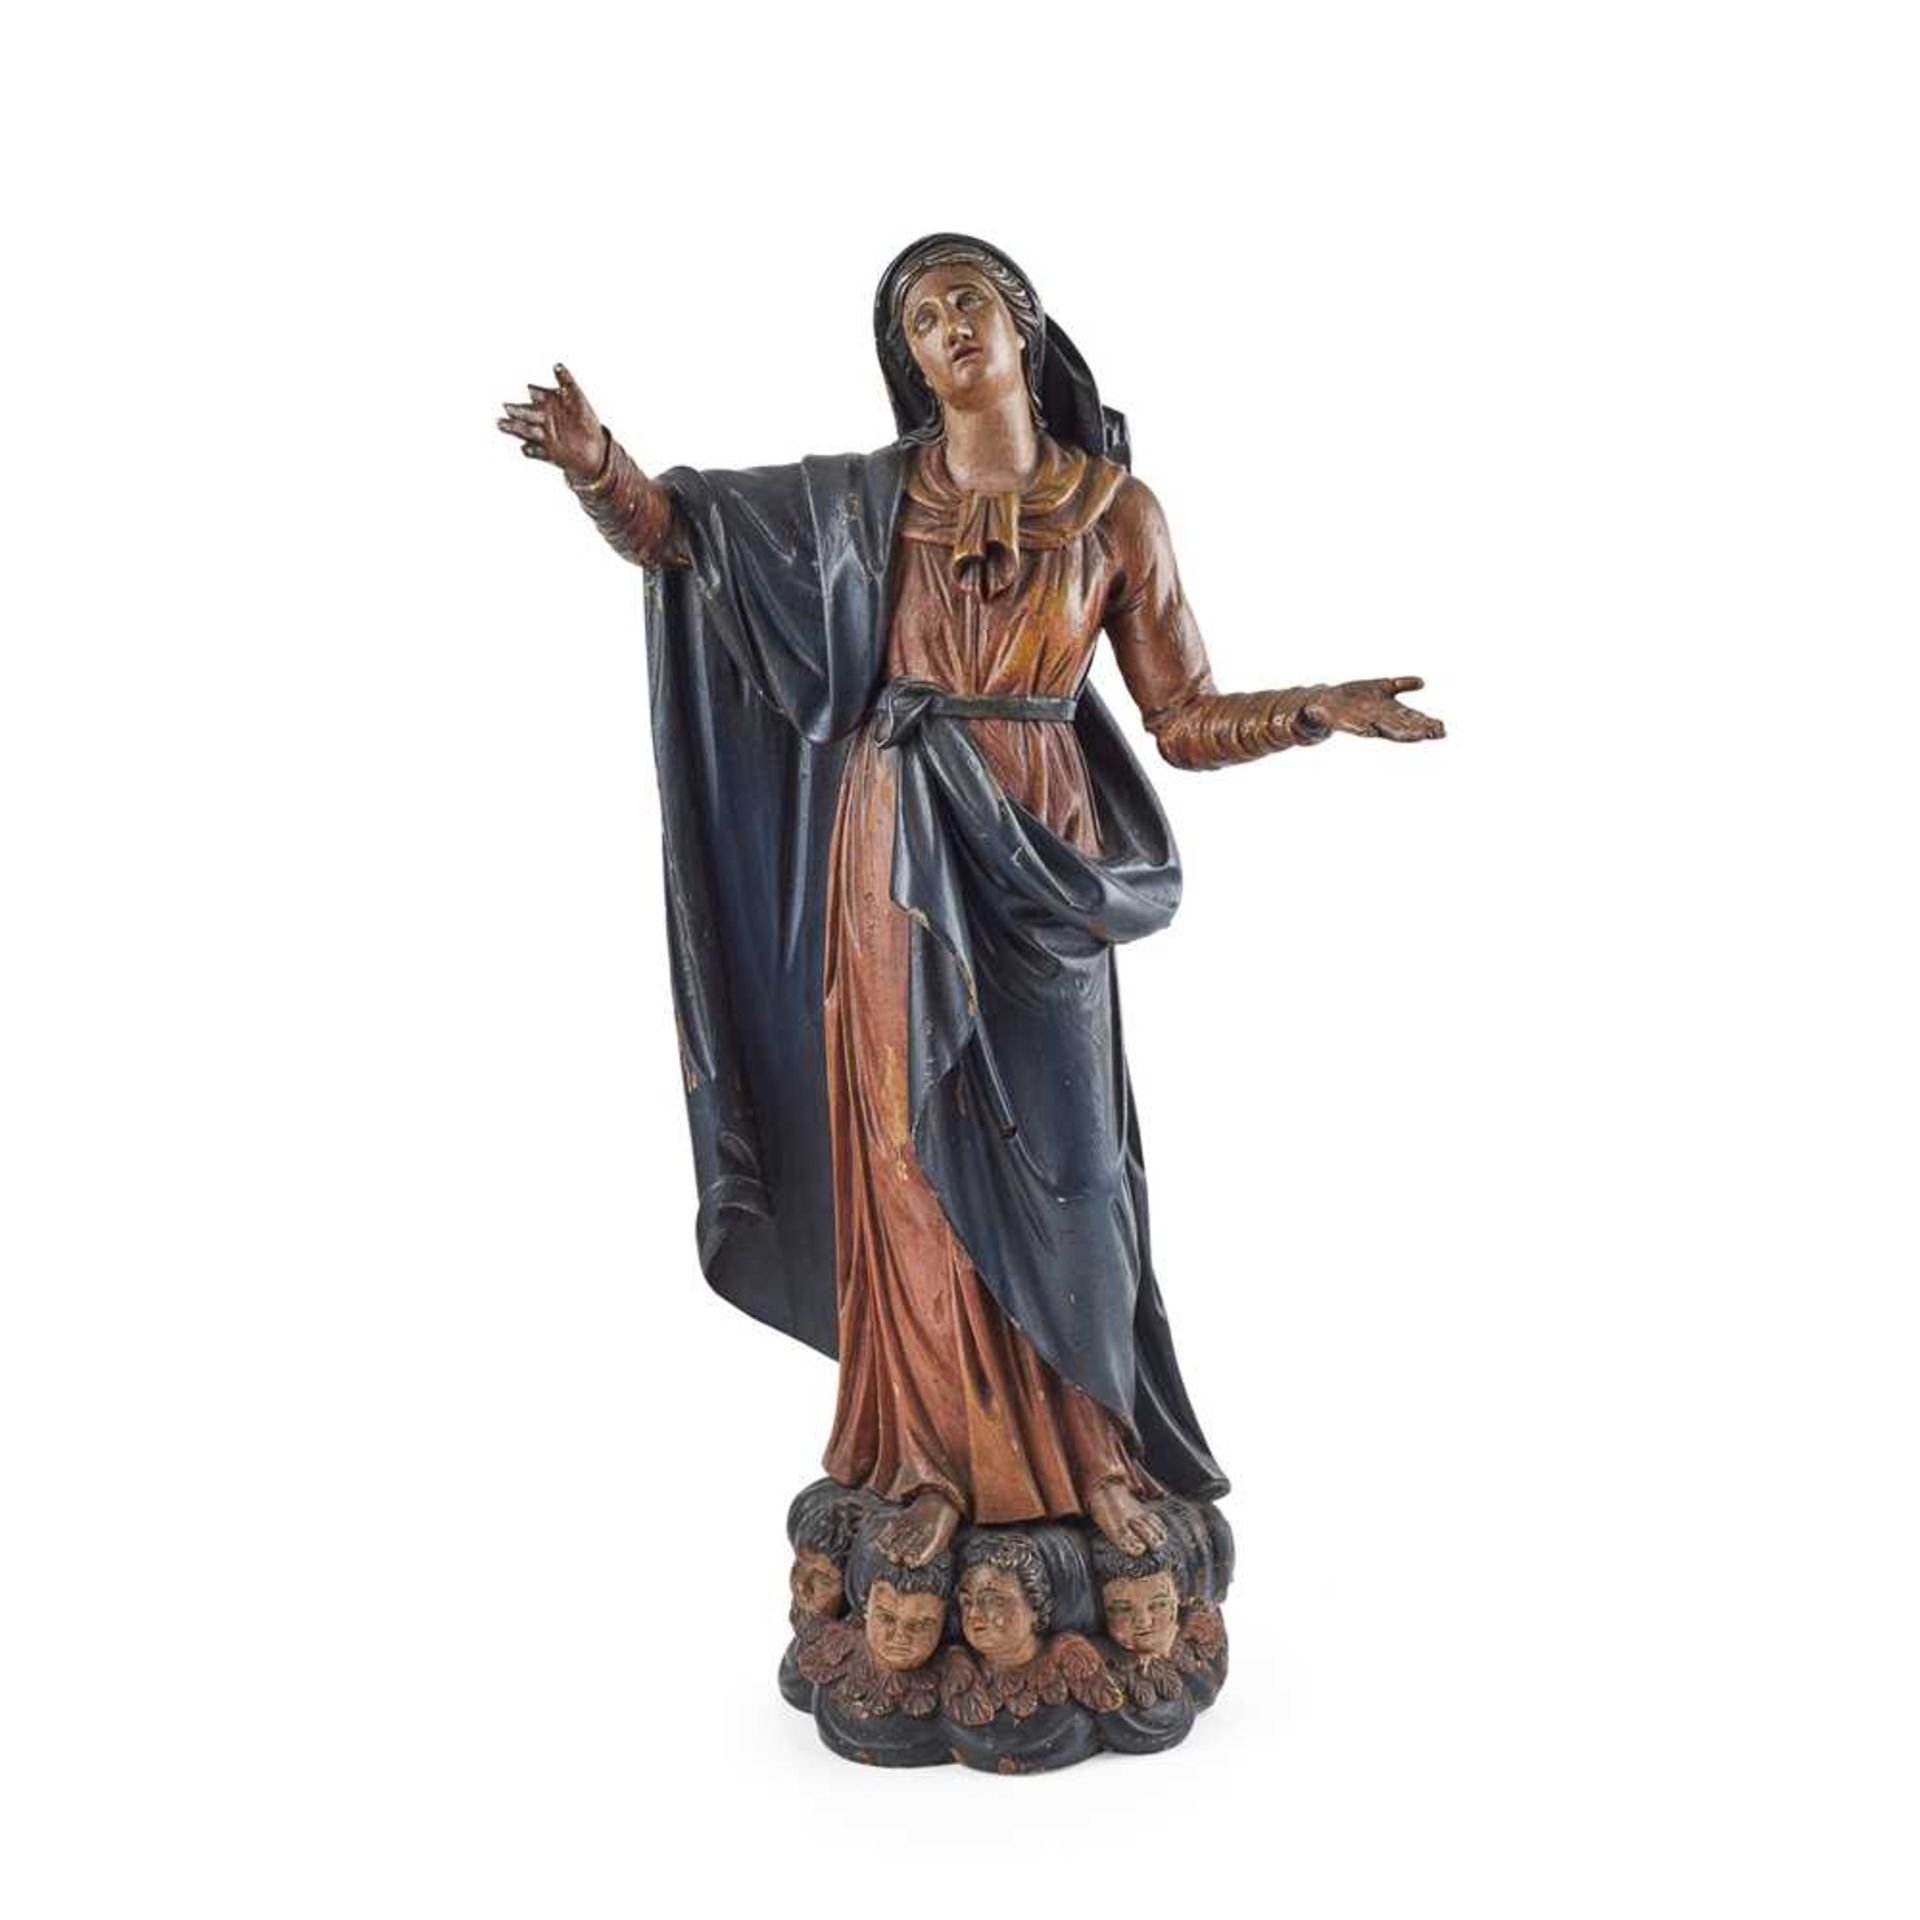 SPANISH CARVED POLYCHROME FIGURE OF MARY MAGDALENE EARLY 18TH CENTURY